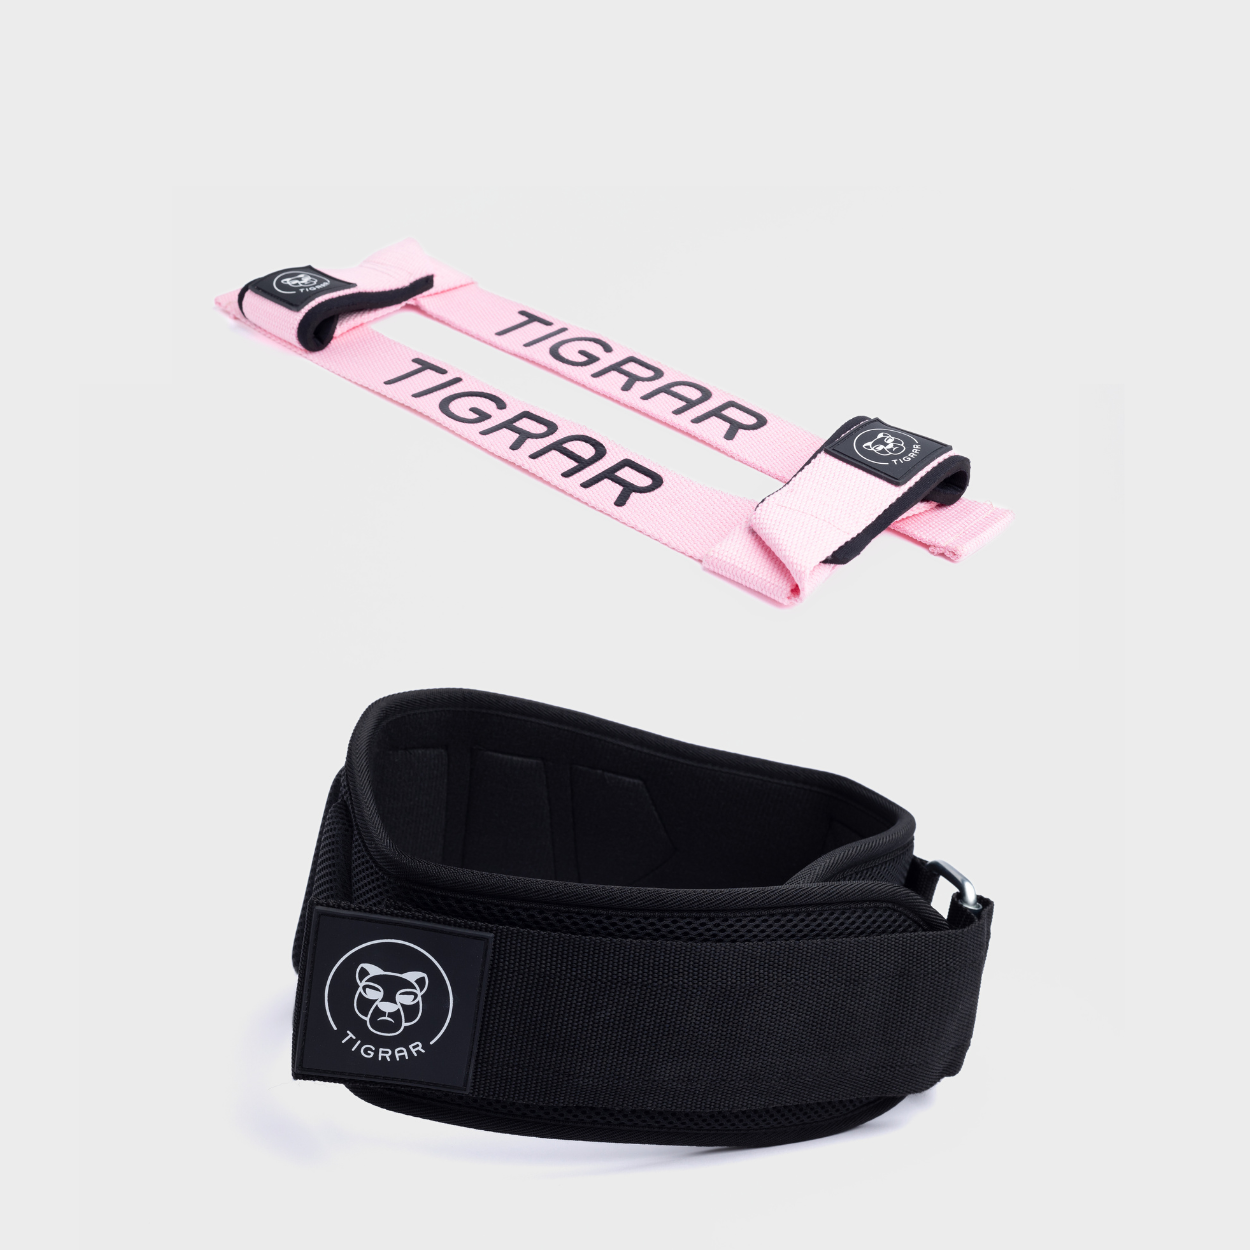 Tigar gym lifting straps and best weight lifting belt for women